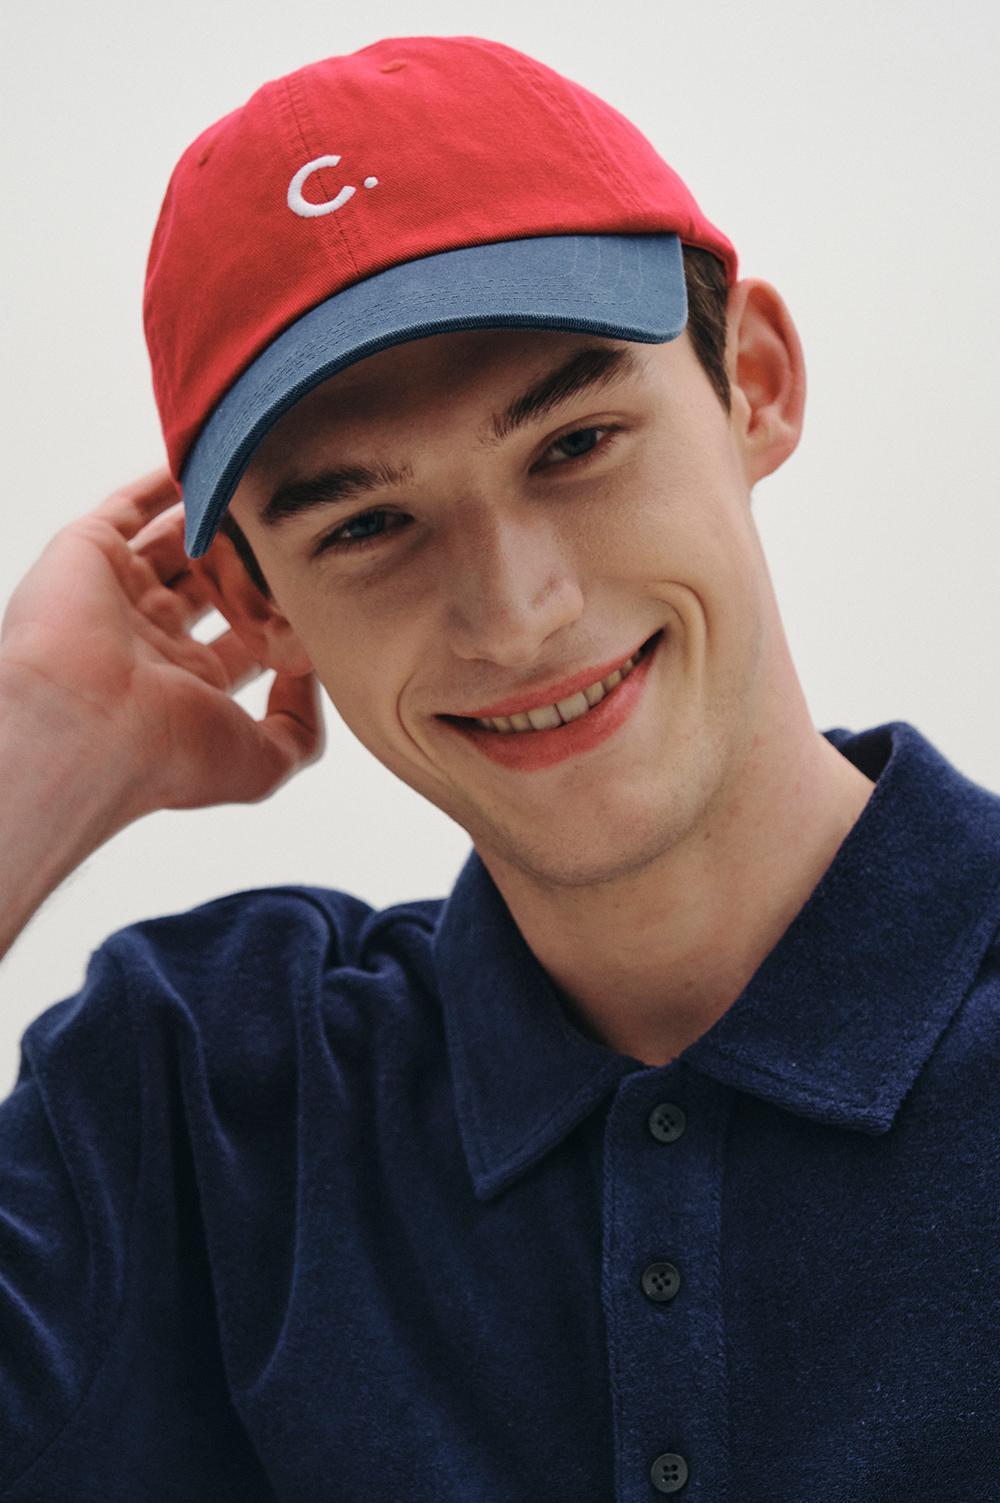 clove - Basic Fit Ball Cap Colorblock (Red)